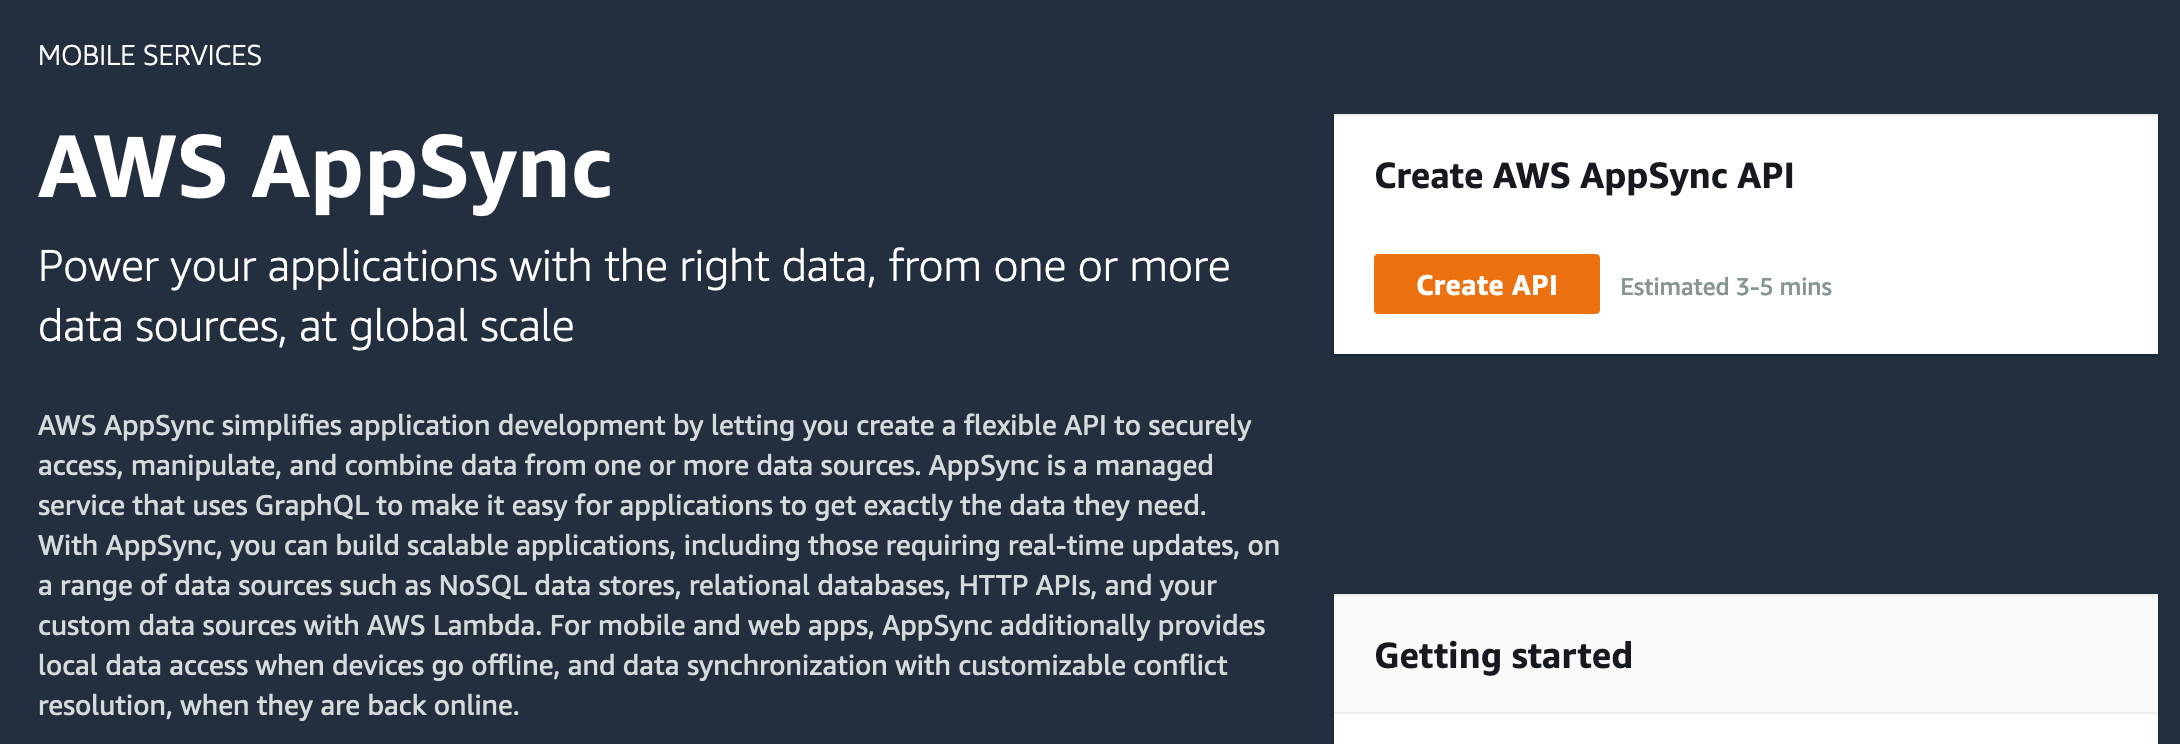 create new appsync endpoint